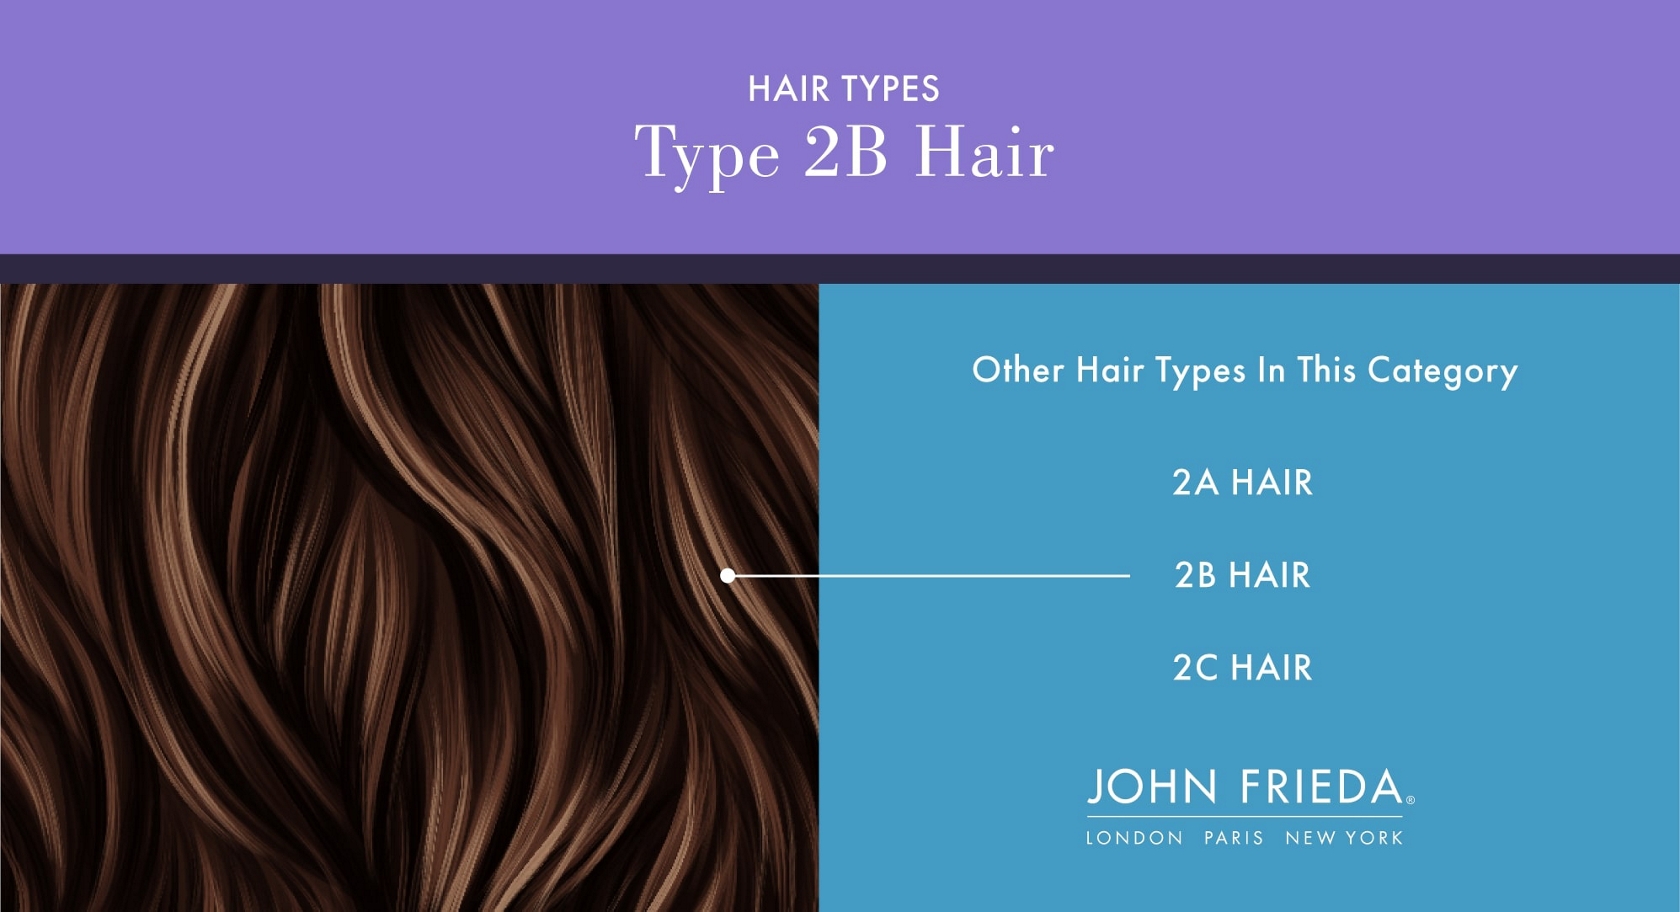 2B Hair Type: What Is It & How to Care For It